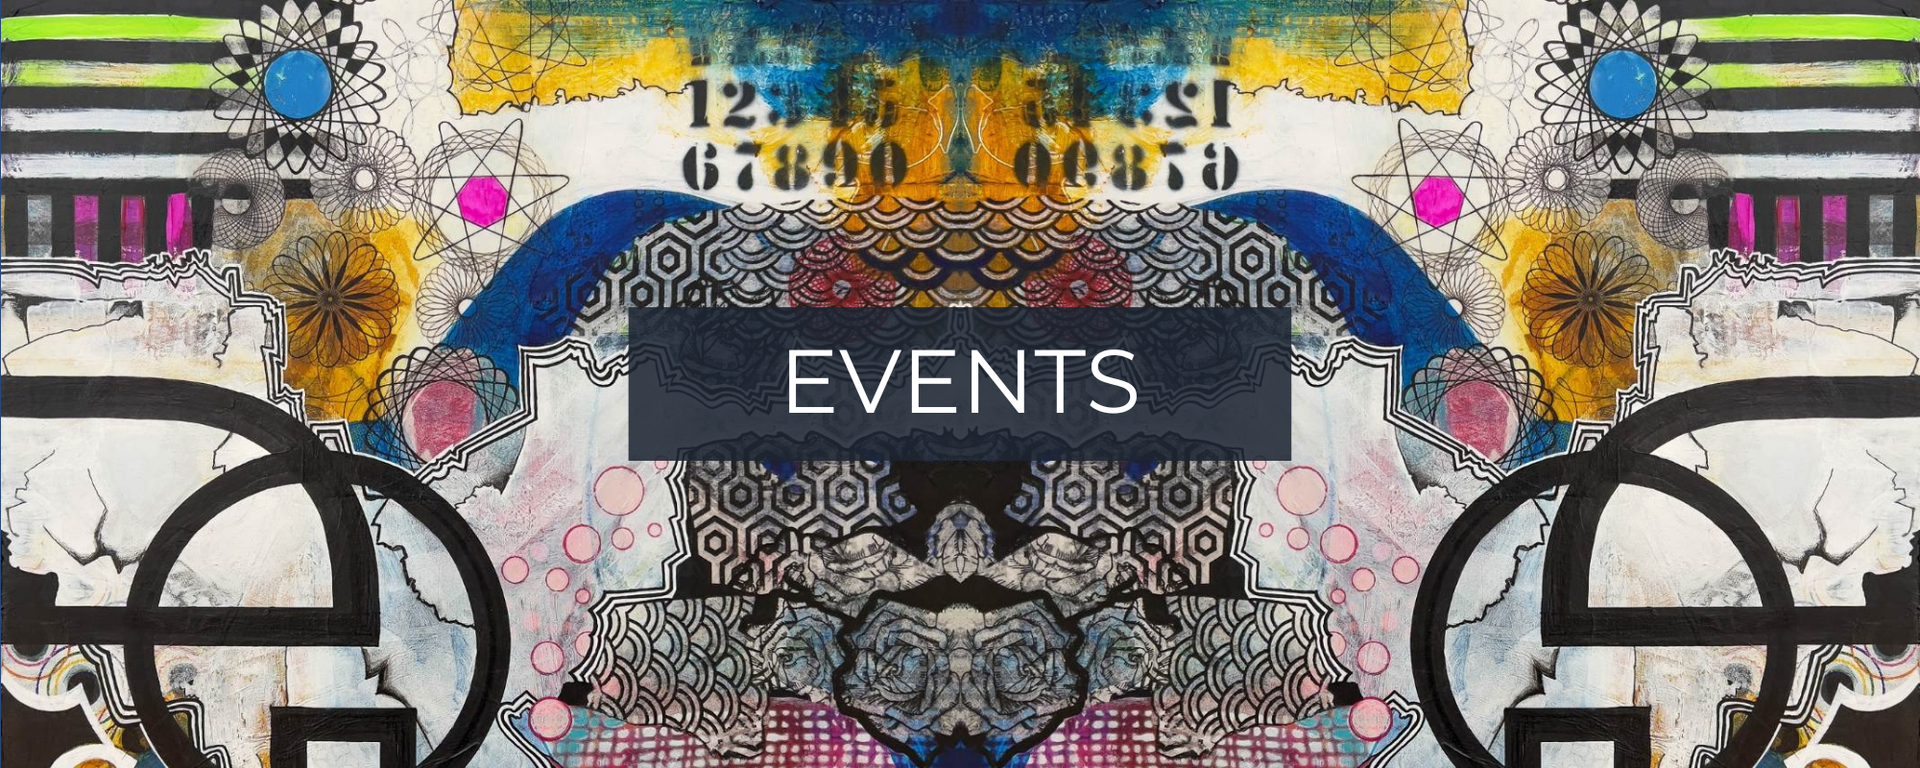 Events banner with abstract original art by local Calgary artist Mary-Jo Lough